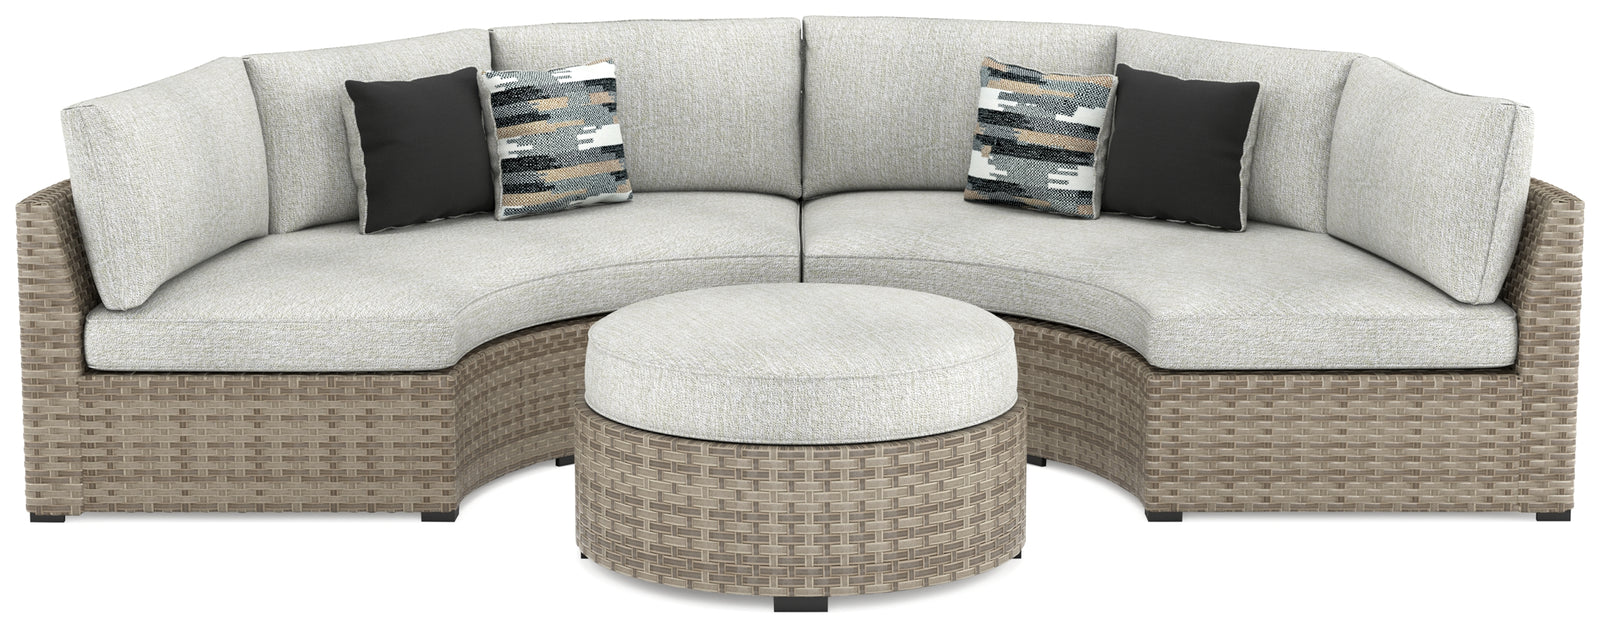 Calworth Beige 2-Piece Sectional With Ottoman